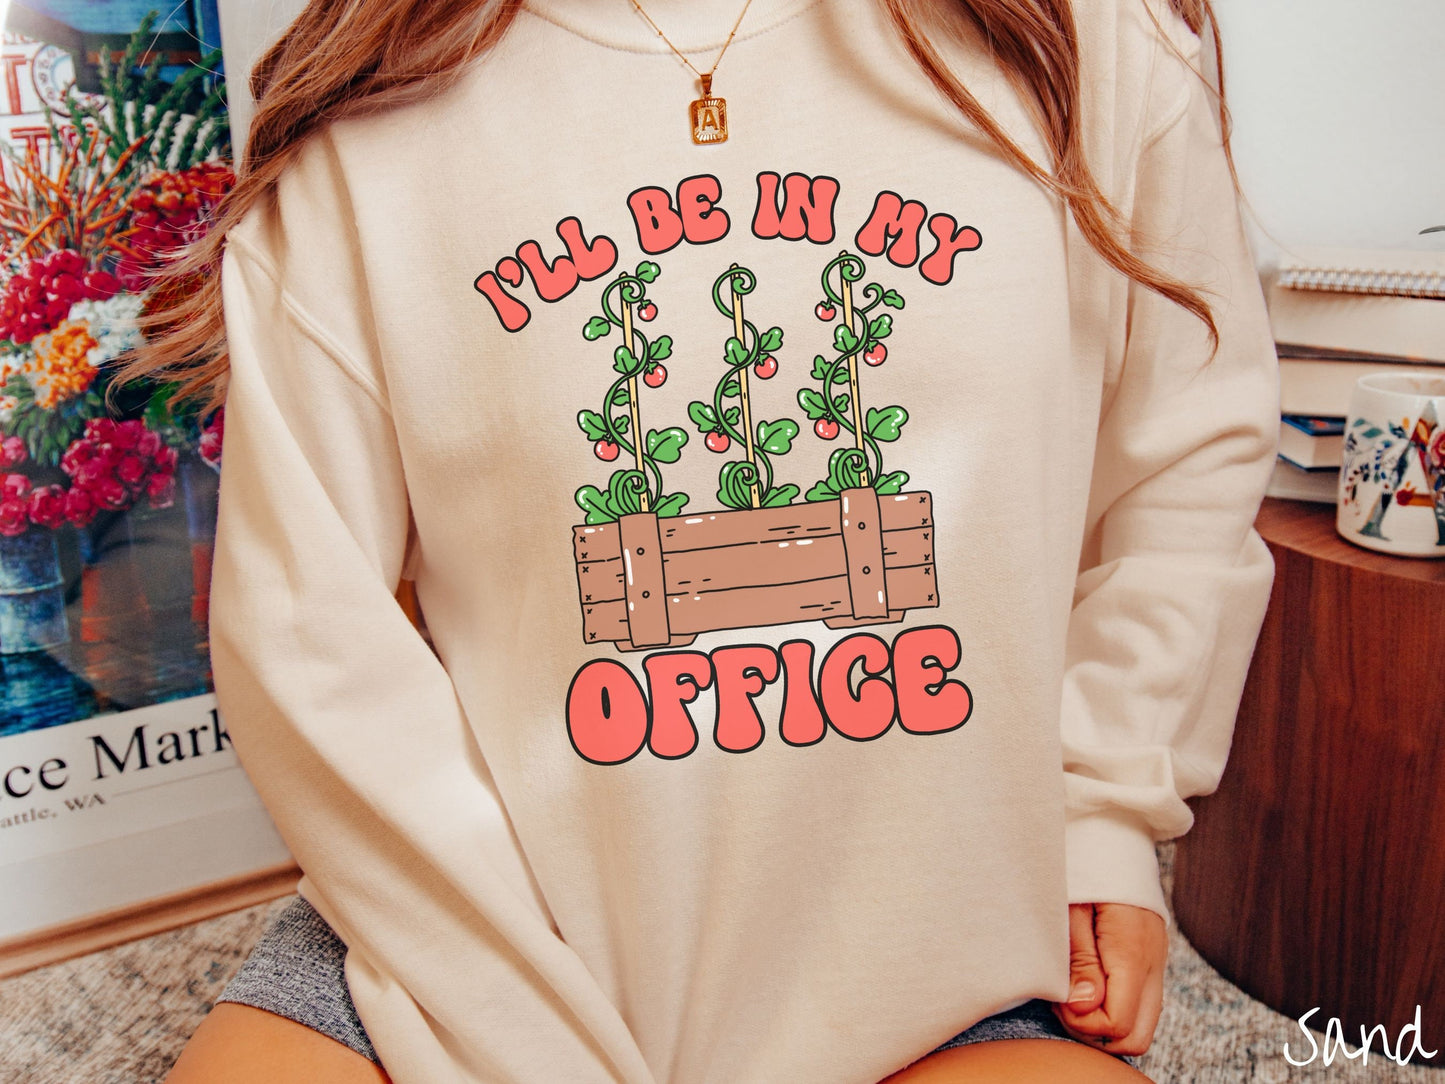 A woman wearing a cute, vintage sand colored comfy sweatshirt with the text I’ll Be in My Office in red font across the front. In between the text is a wooden plant holder with three tomato vines sprouting tomatoes climbing upwards.